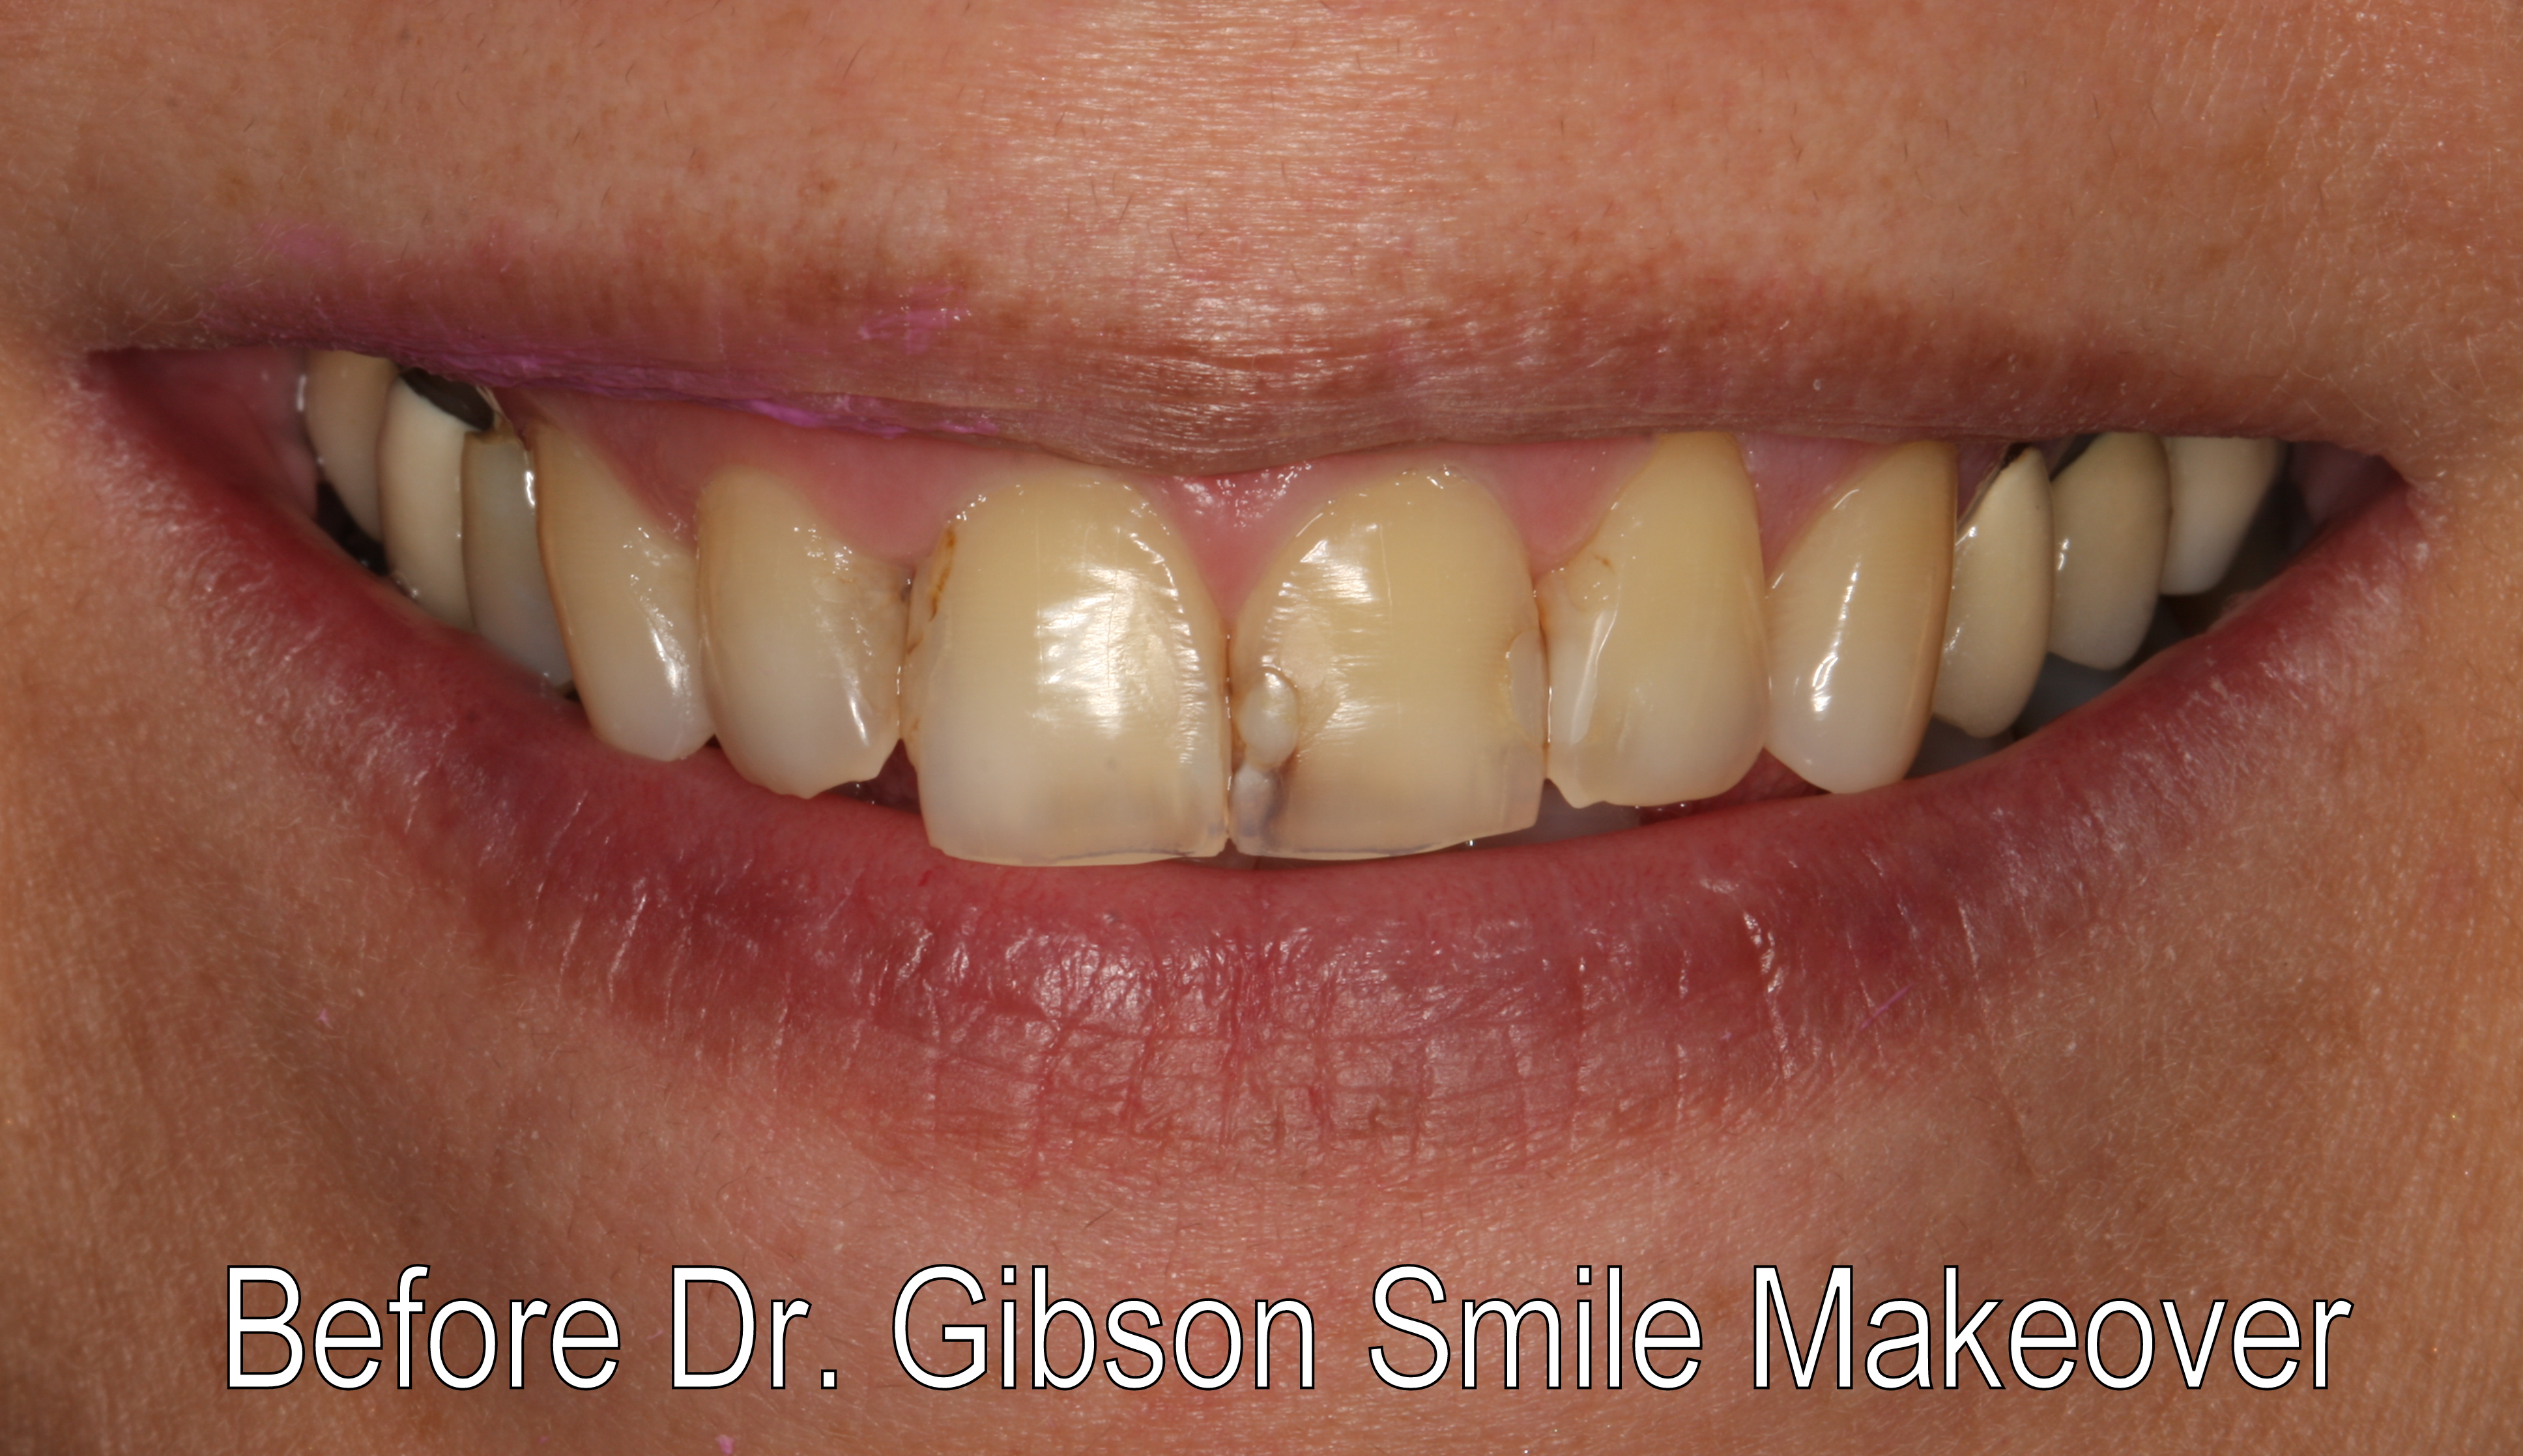 Smiles By Dr. Gibson Smile Makeover 5